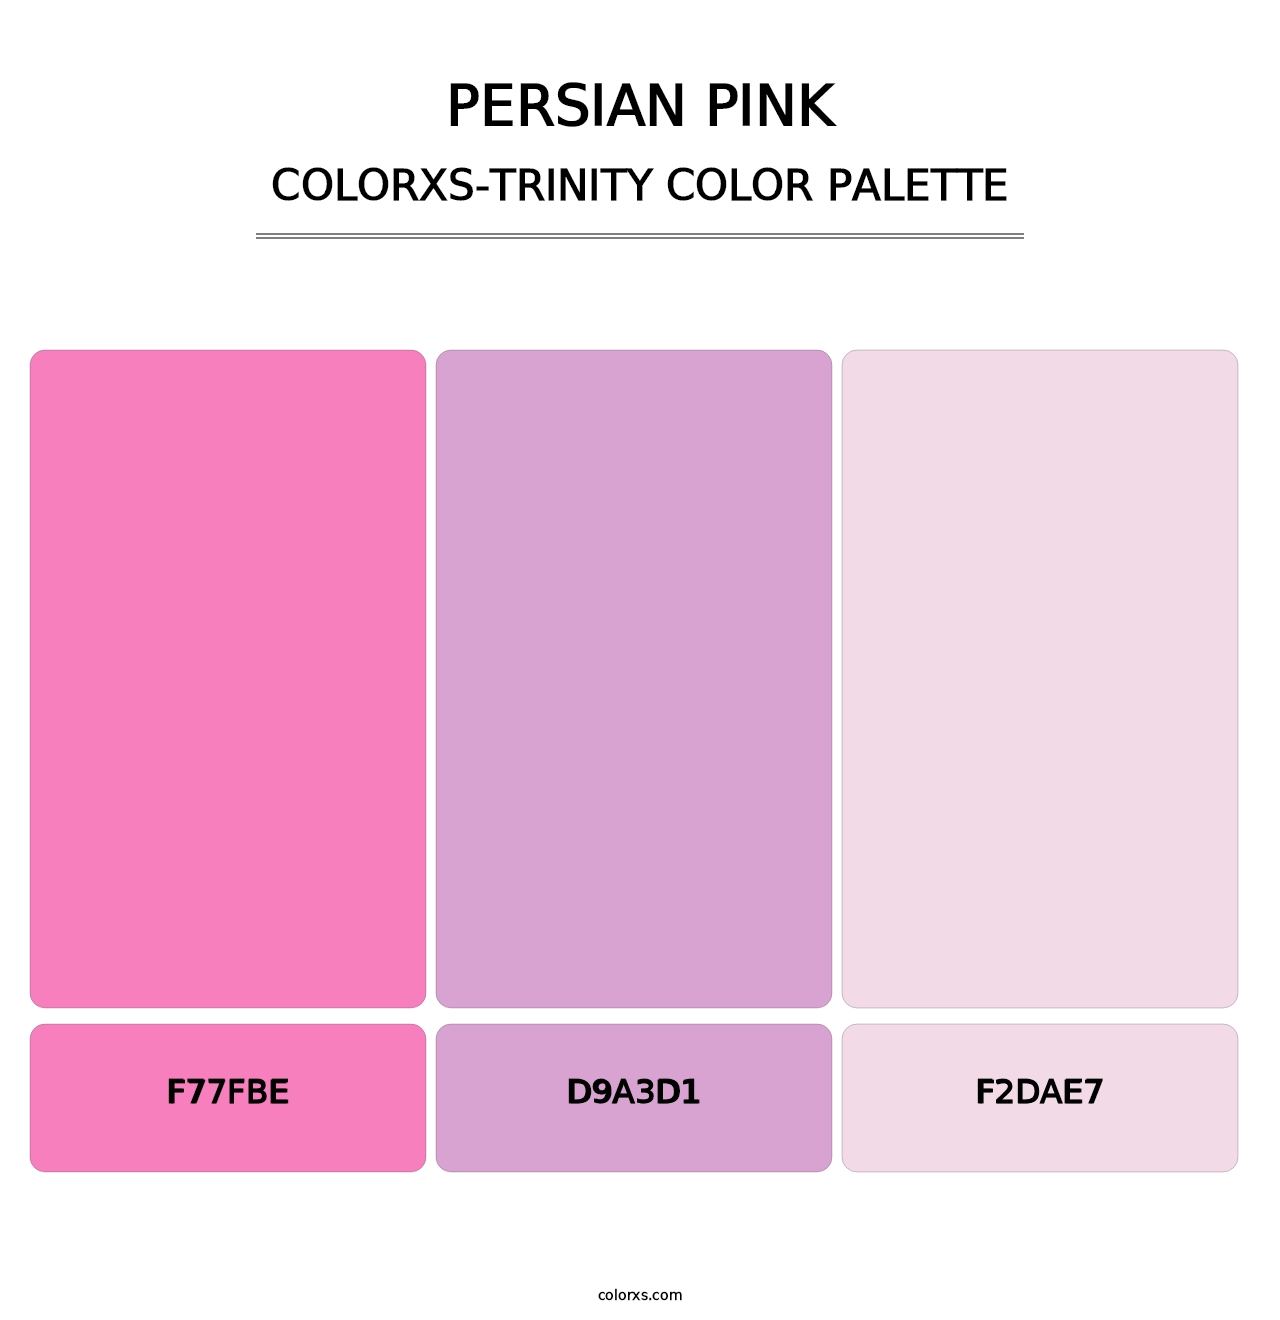 Persian Pink - Colorxs Trinity Palette